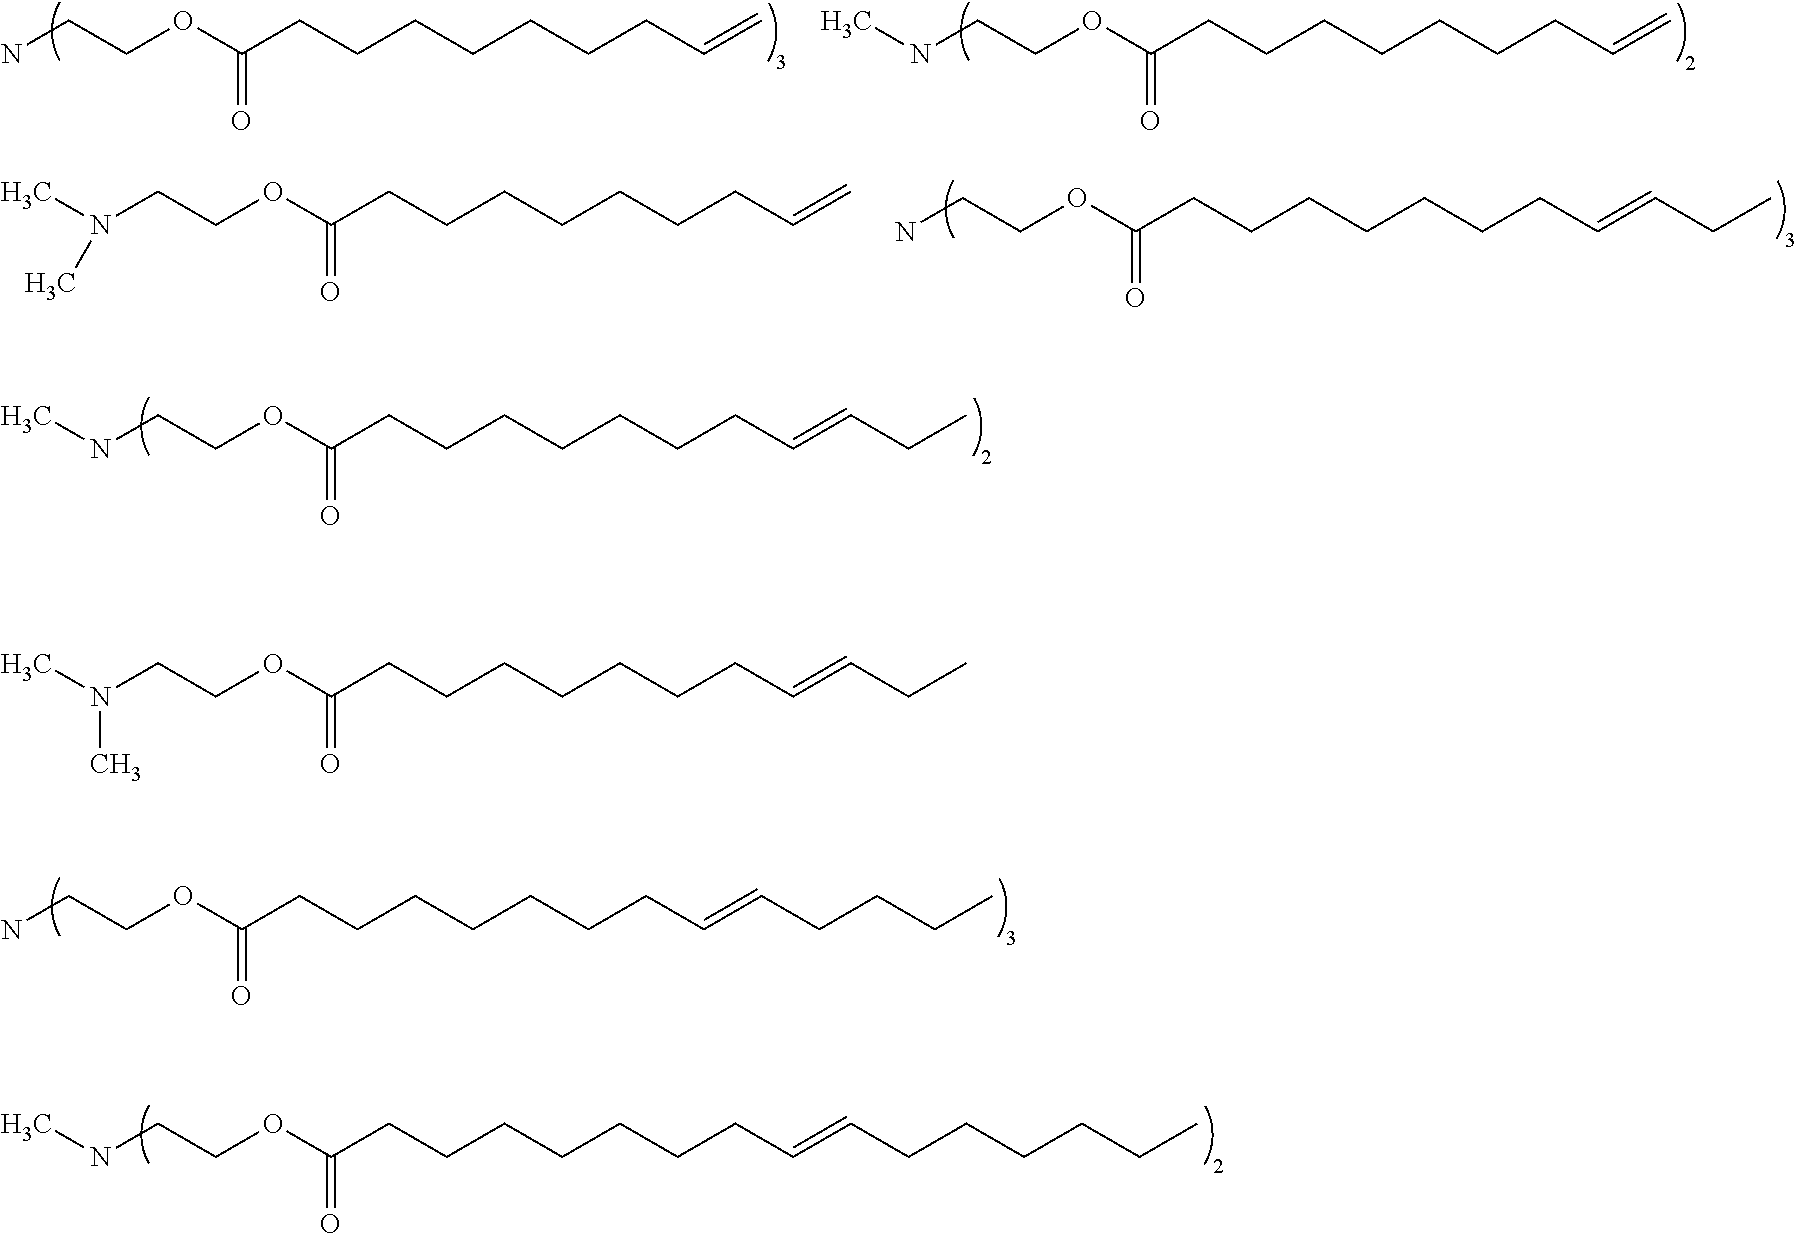 Esteramines and derivatives from natural oil metathesis